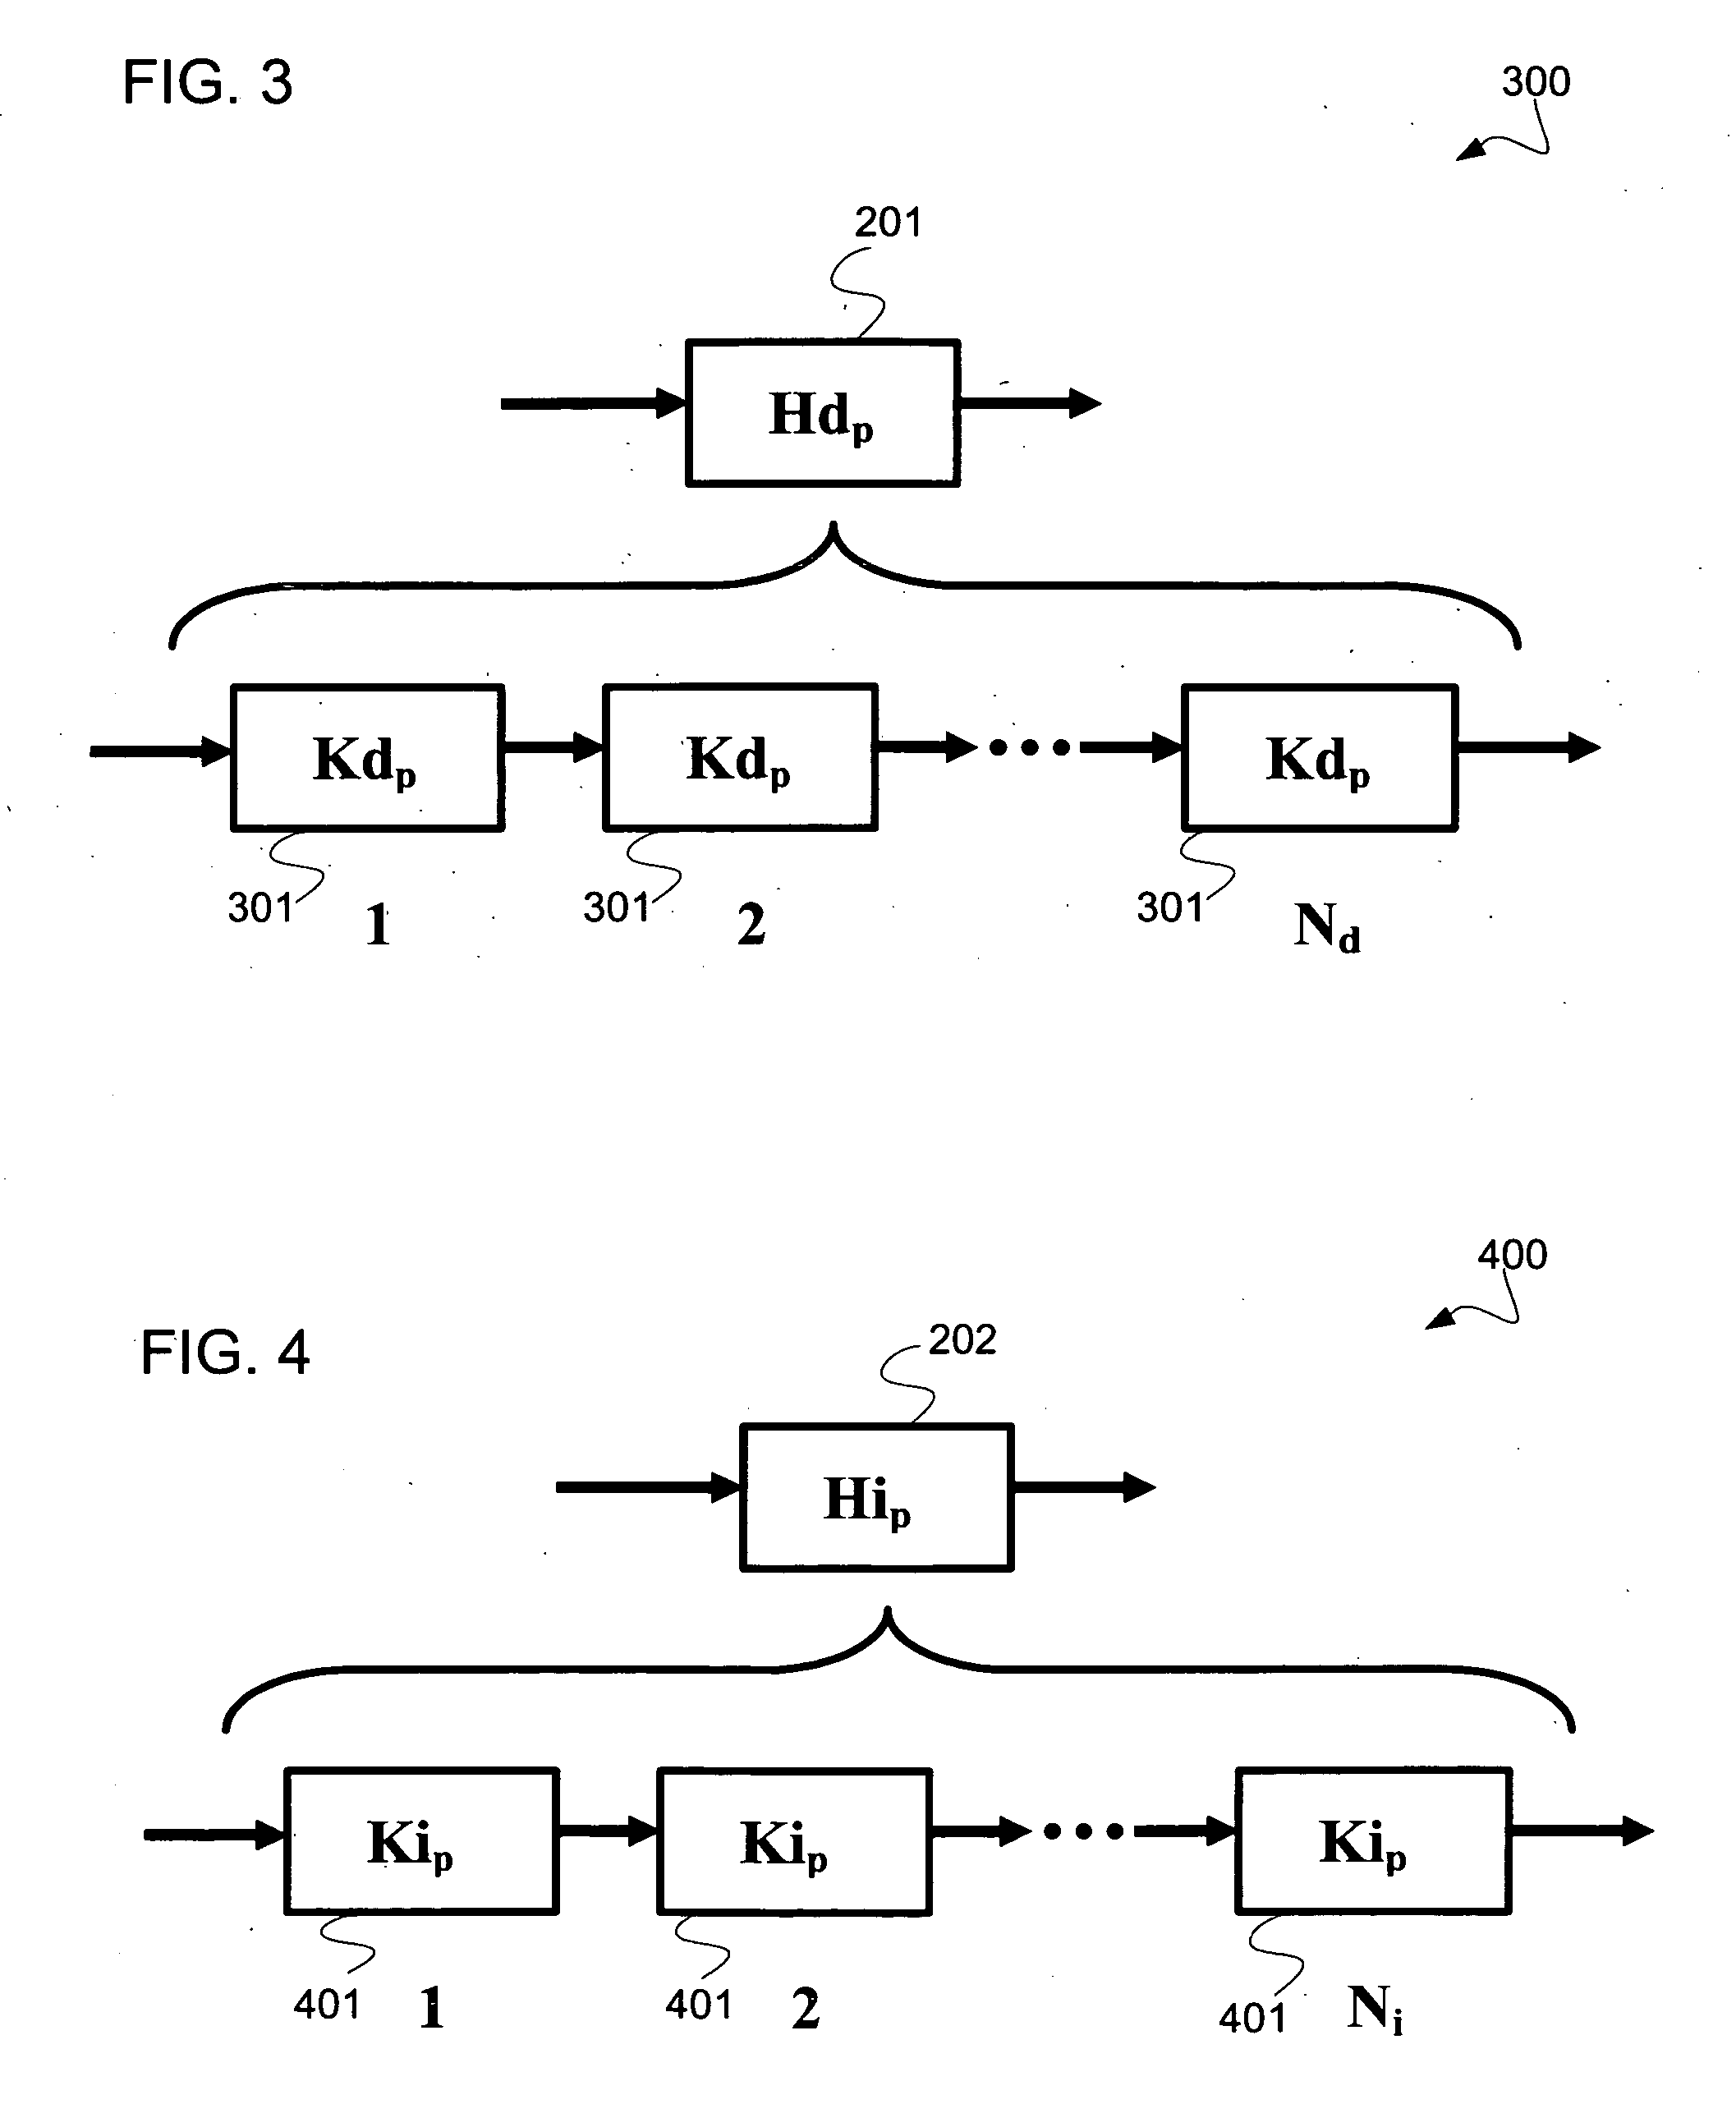 Apparatus for signal decomposition, analysis and reconstruction